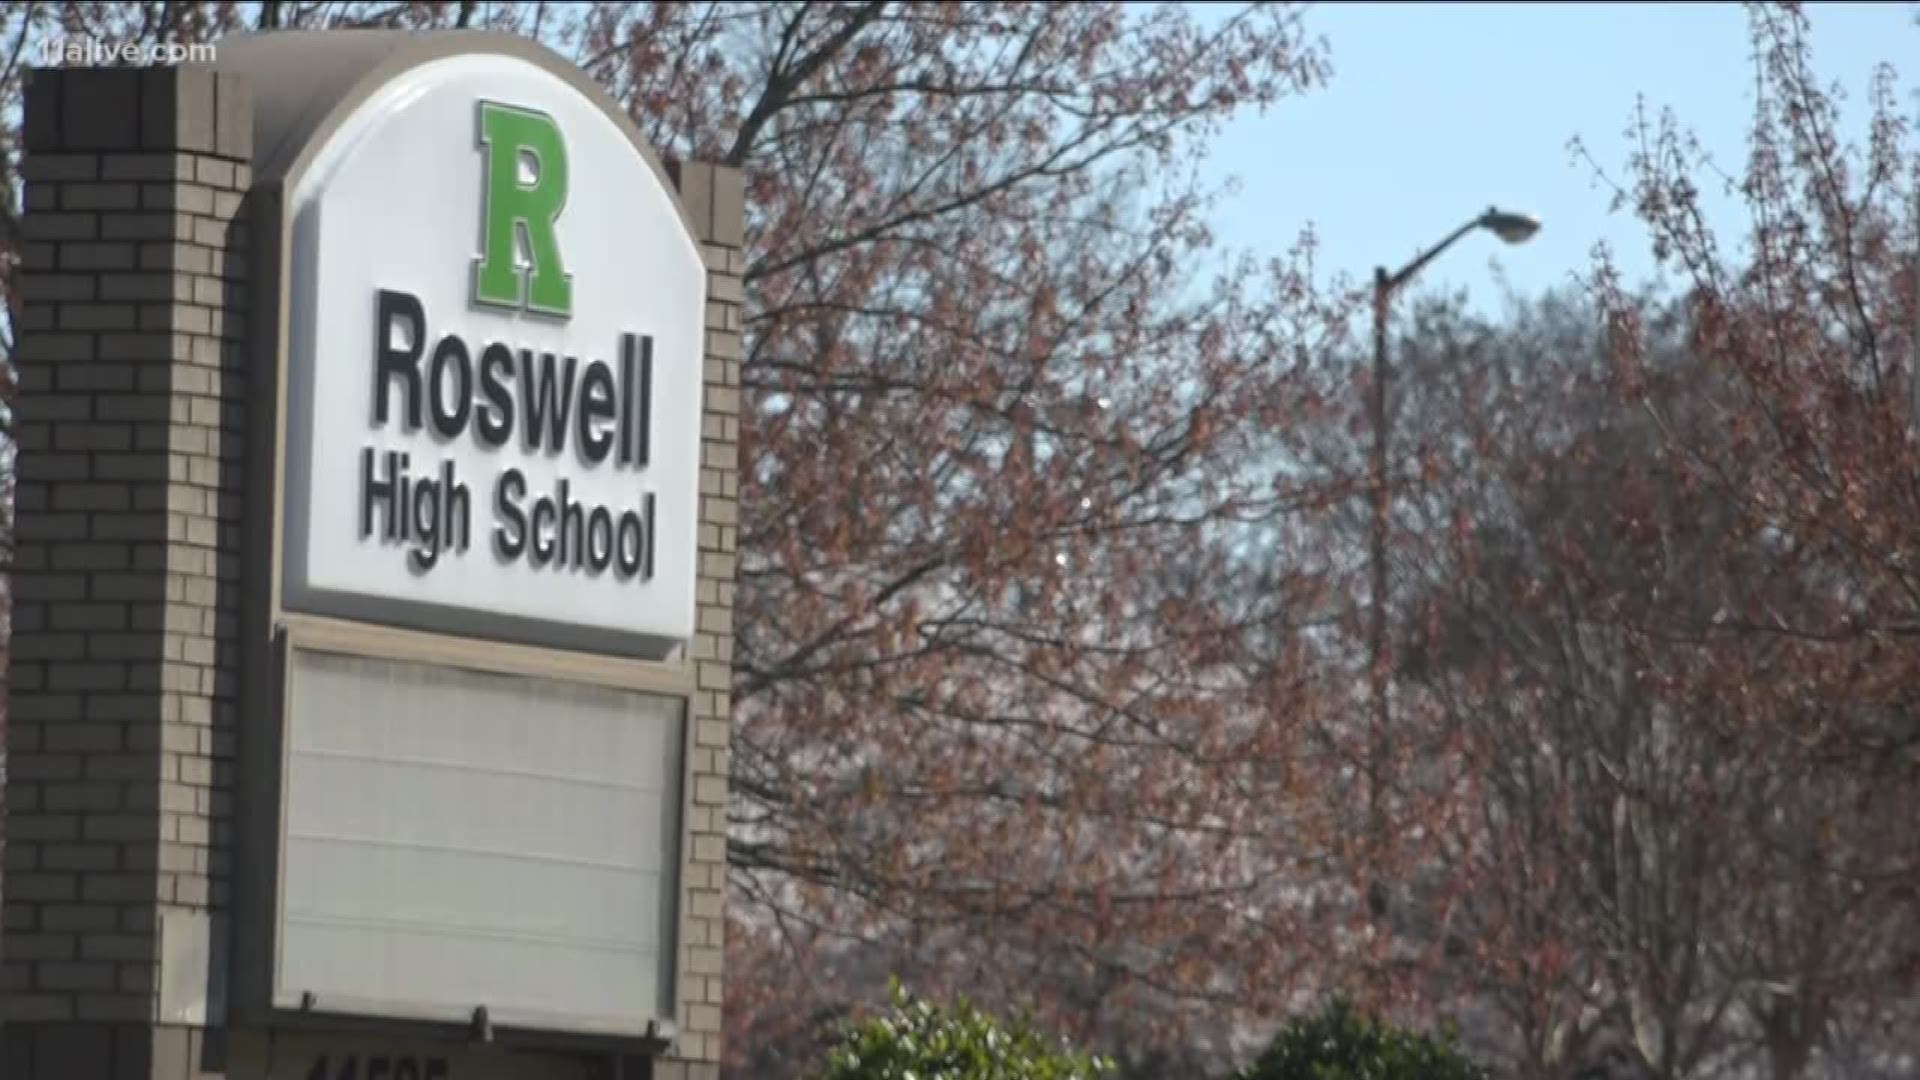 A student at Roswell High School reported the Dropbox account to school authorities.